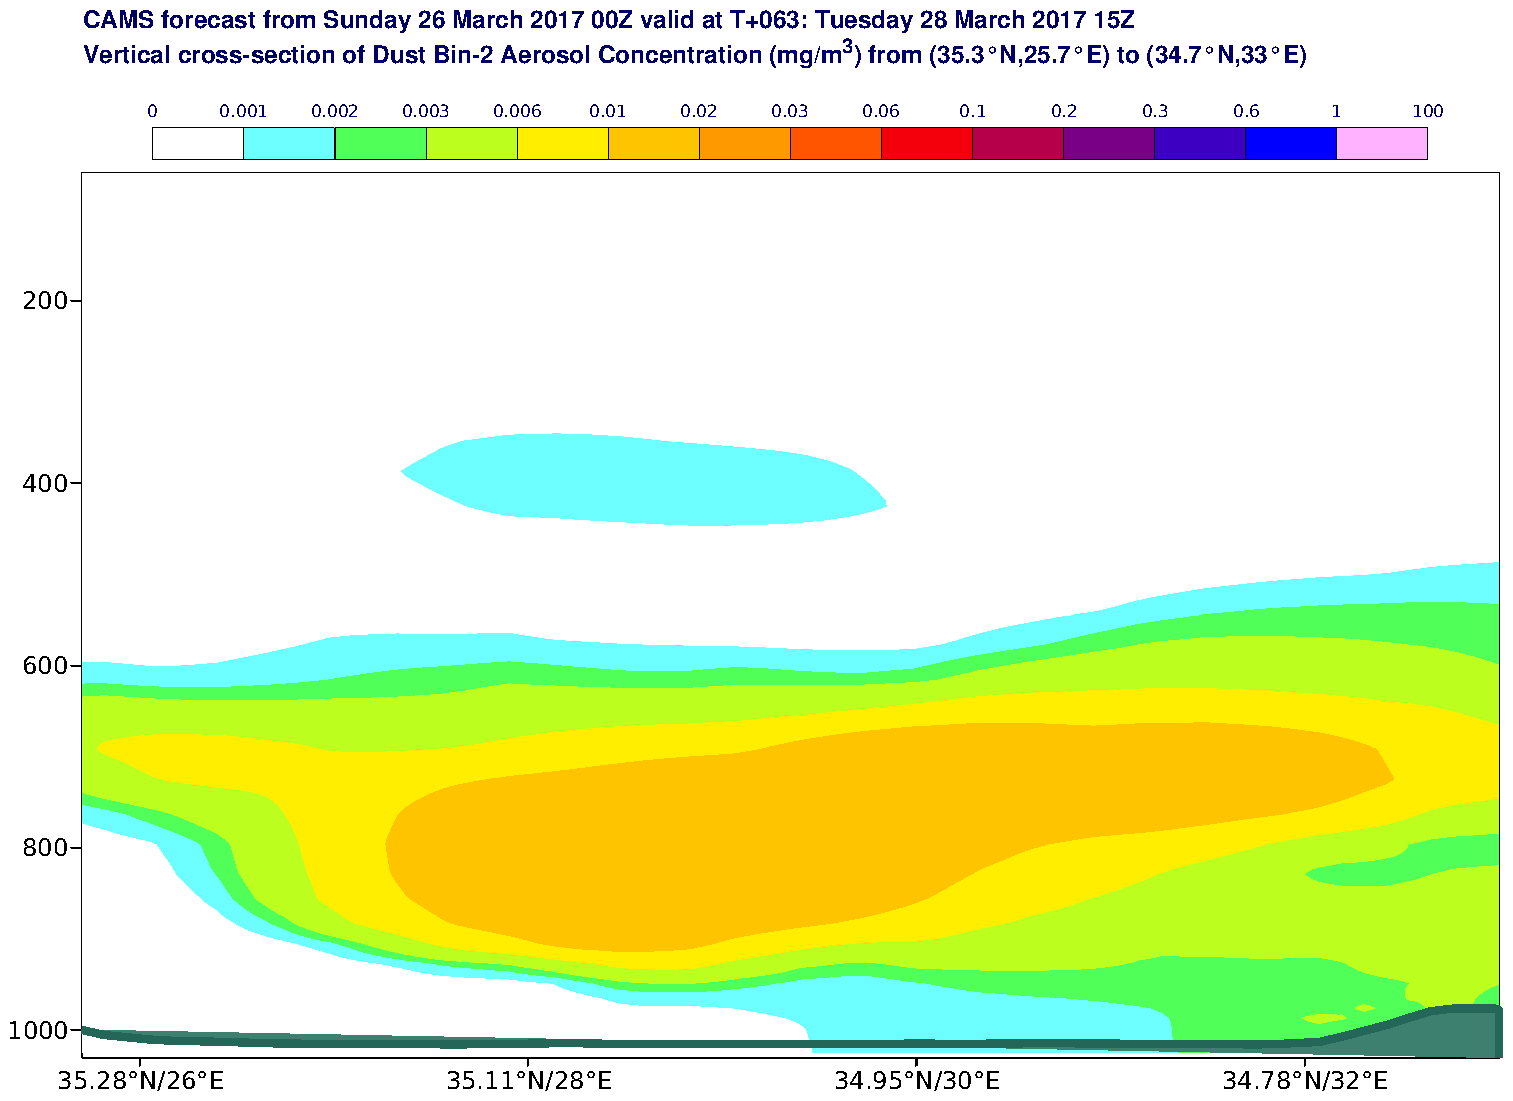 Vertical cross-section of Dust Bin-2 Aerosol Concentration (mg/m3) valid at T63 - 2017-03-28 15:00